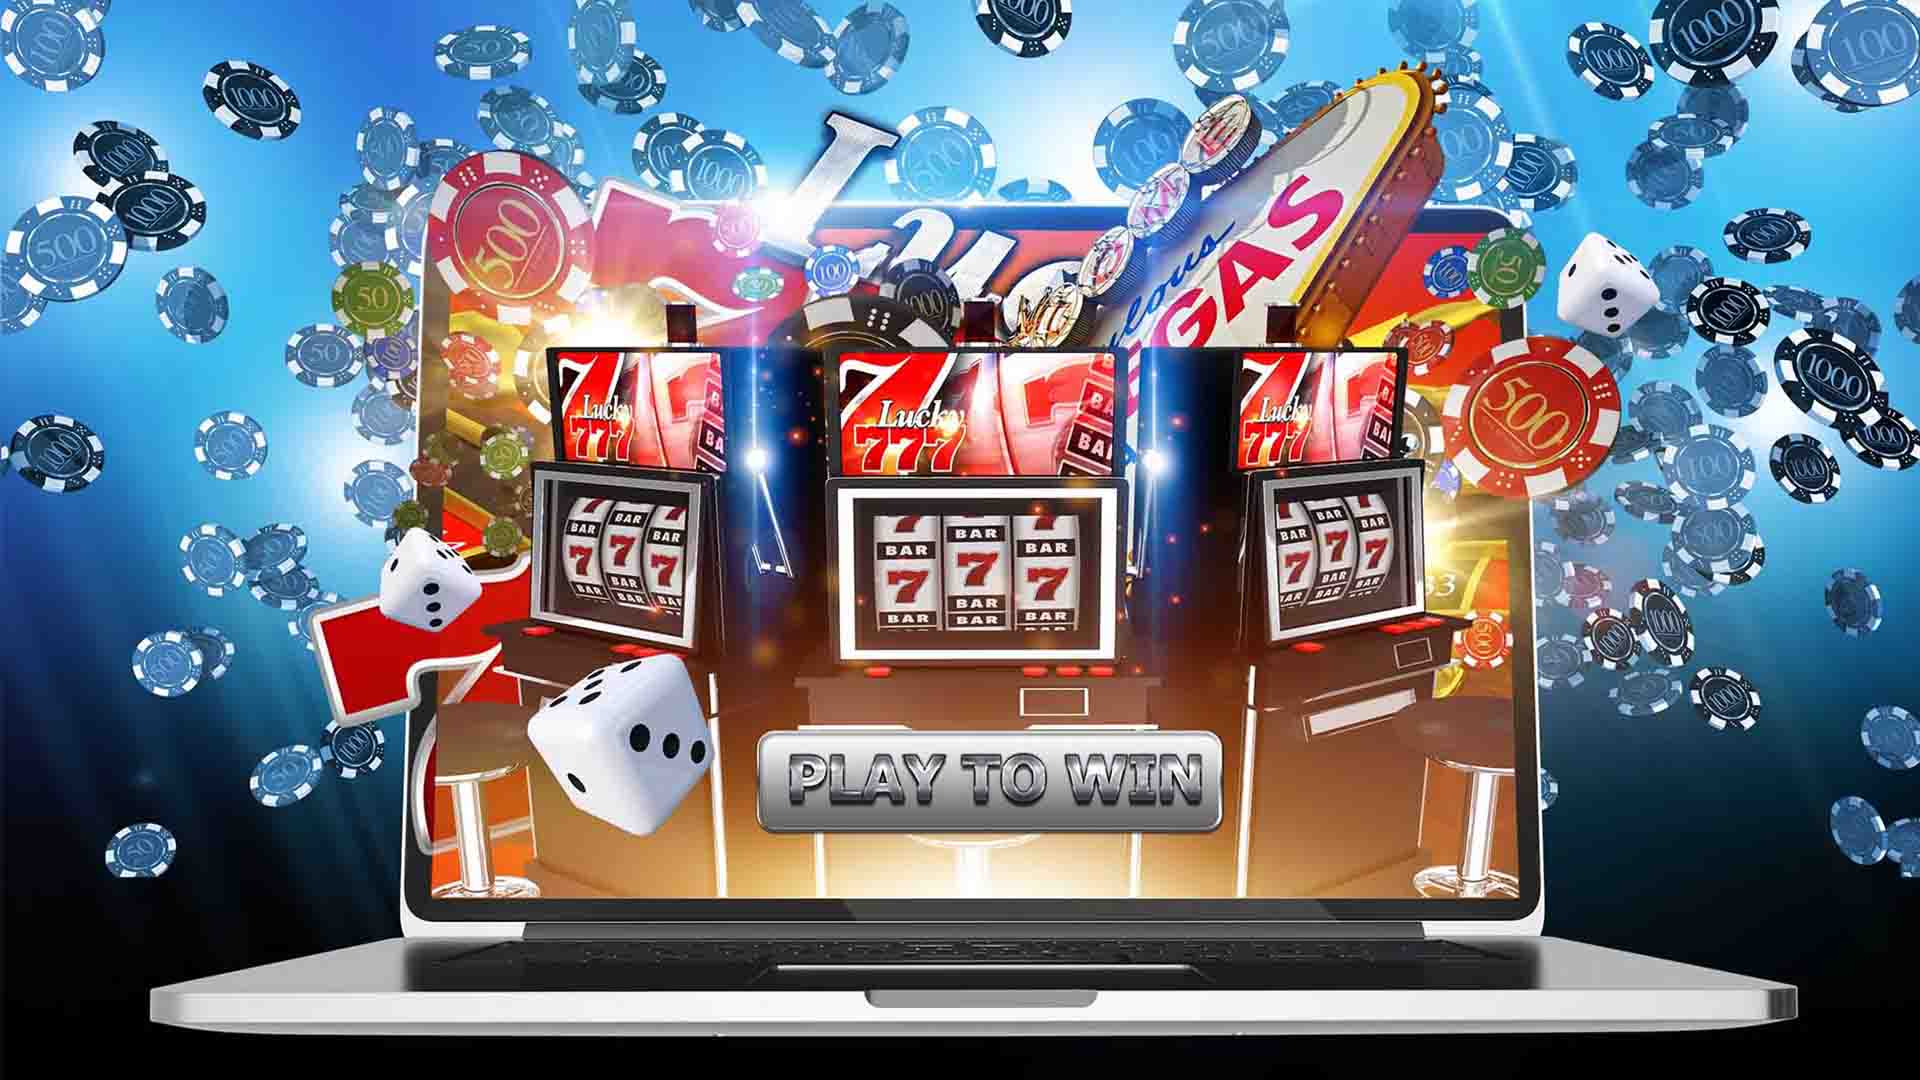 Reasons to Play Online Casino: Anything Goes